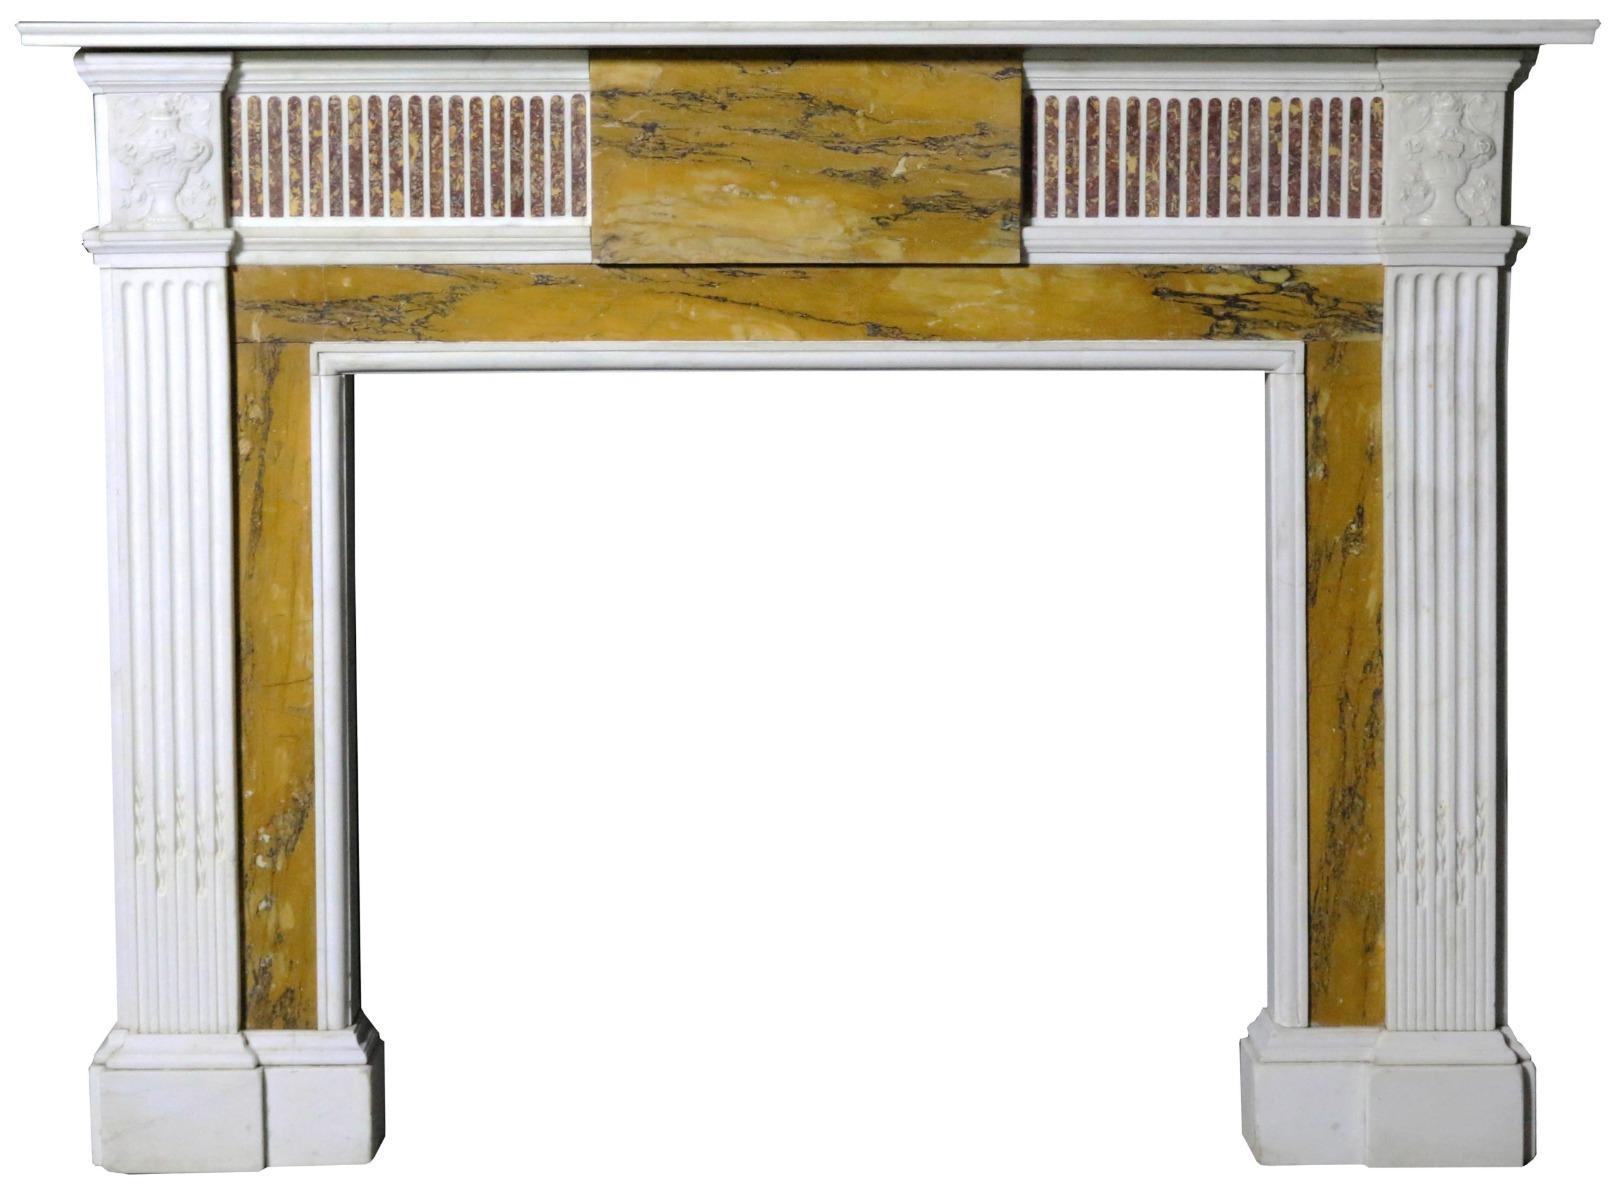 A good quality mid-19th century English, George III style chimneypiece. Constructed from White Statuary, Sienna and Breccia marbles, with carved Statuary marble end blocks. Reclaimed from a house in London.

Opening H 98 x W 111 cm.